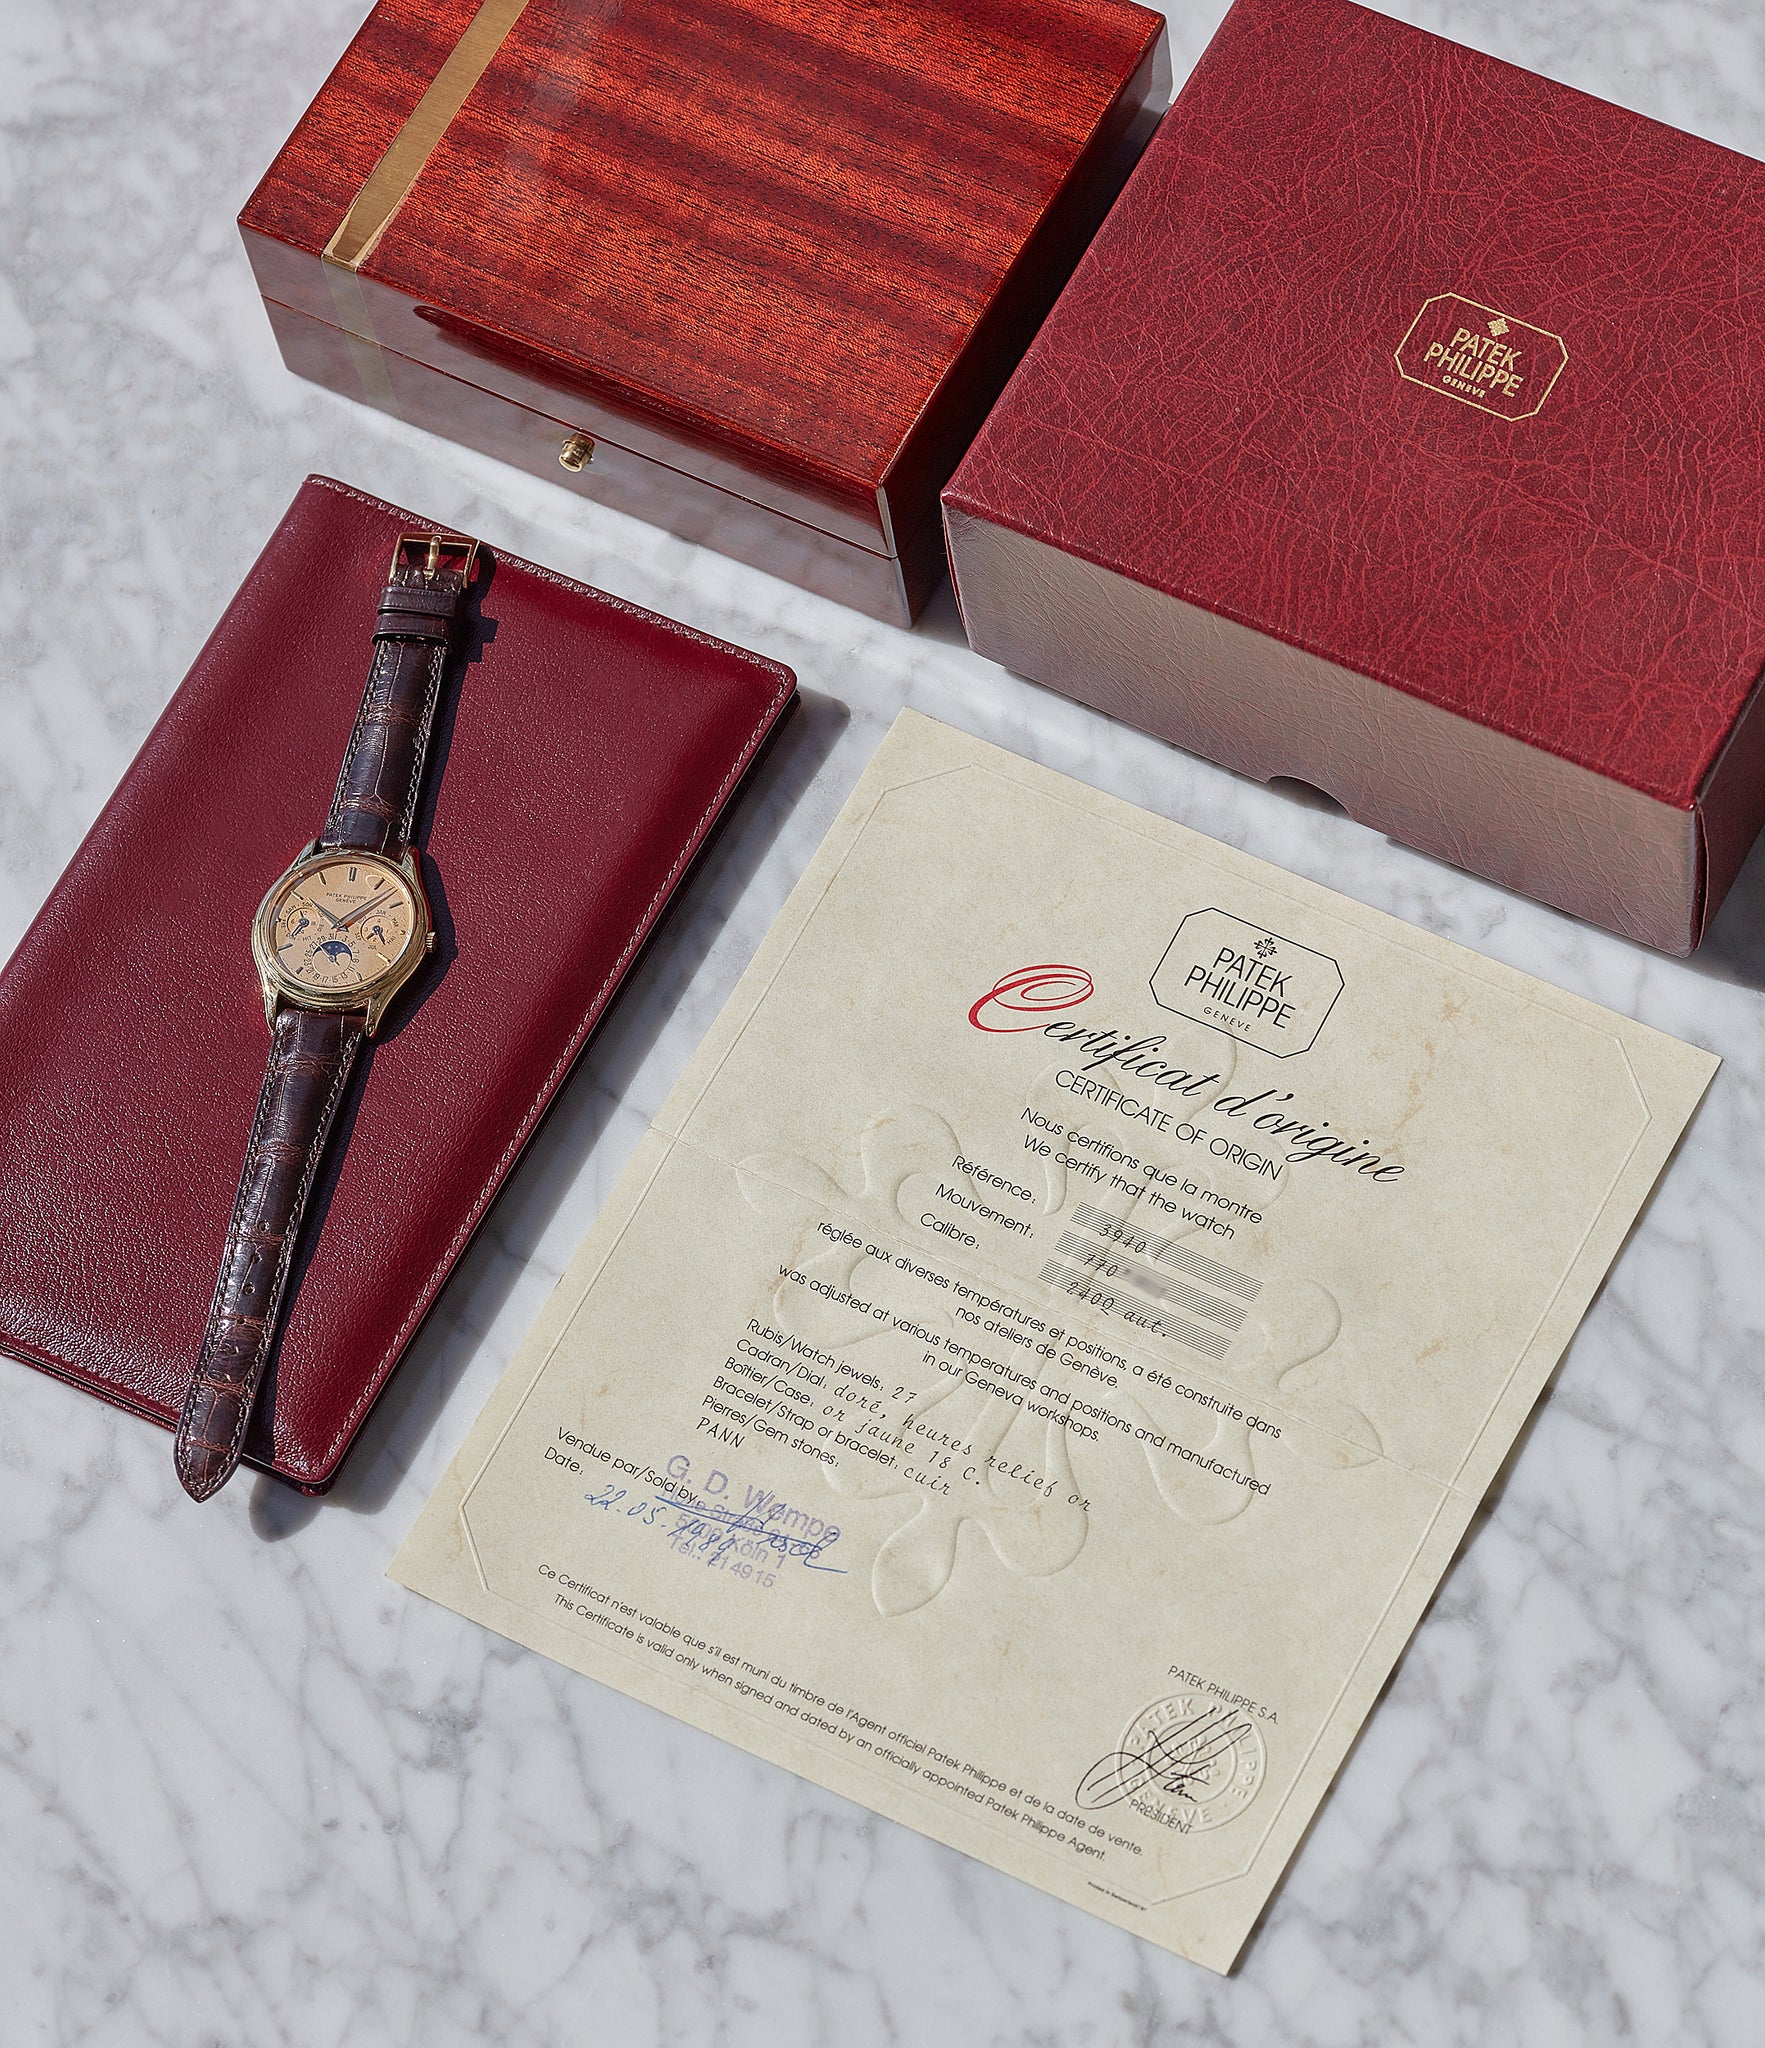 full set box papers archive extract vintage Patek Philippe 3940J perpetual calendar dress watch for sale online at A Collected Man London UK specialist of rare watches